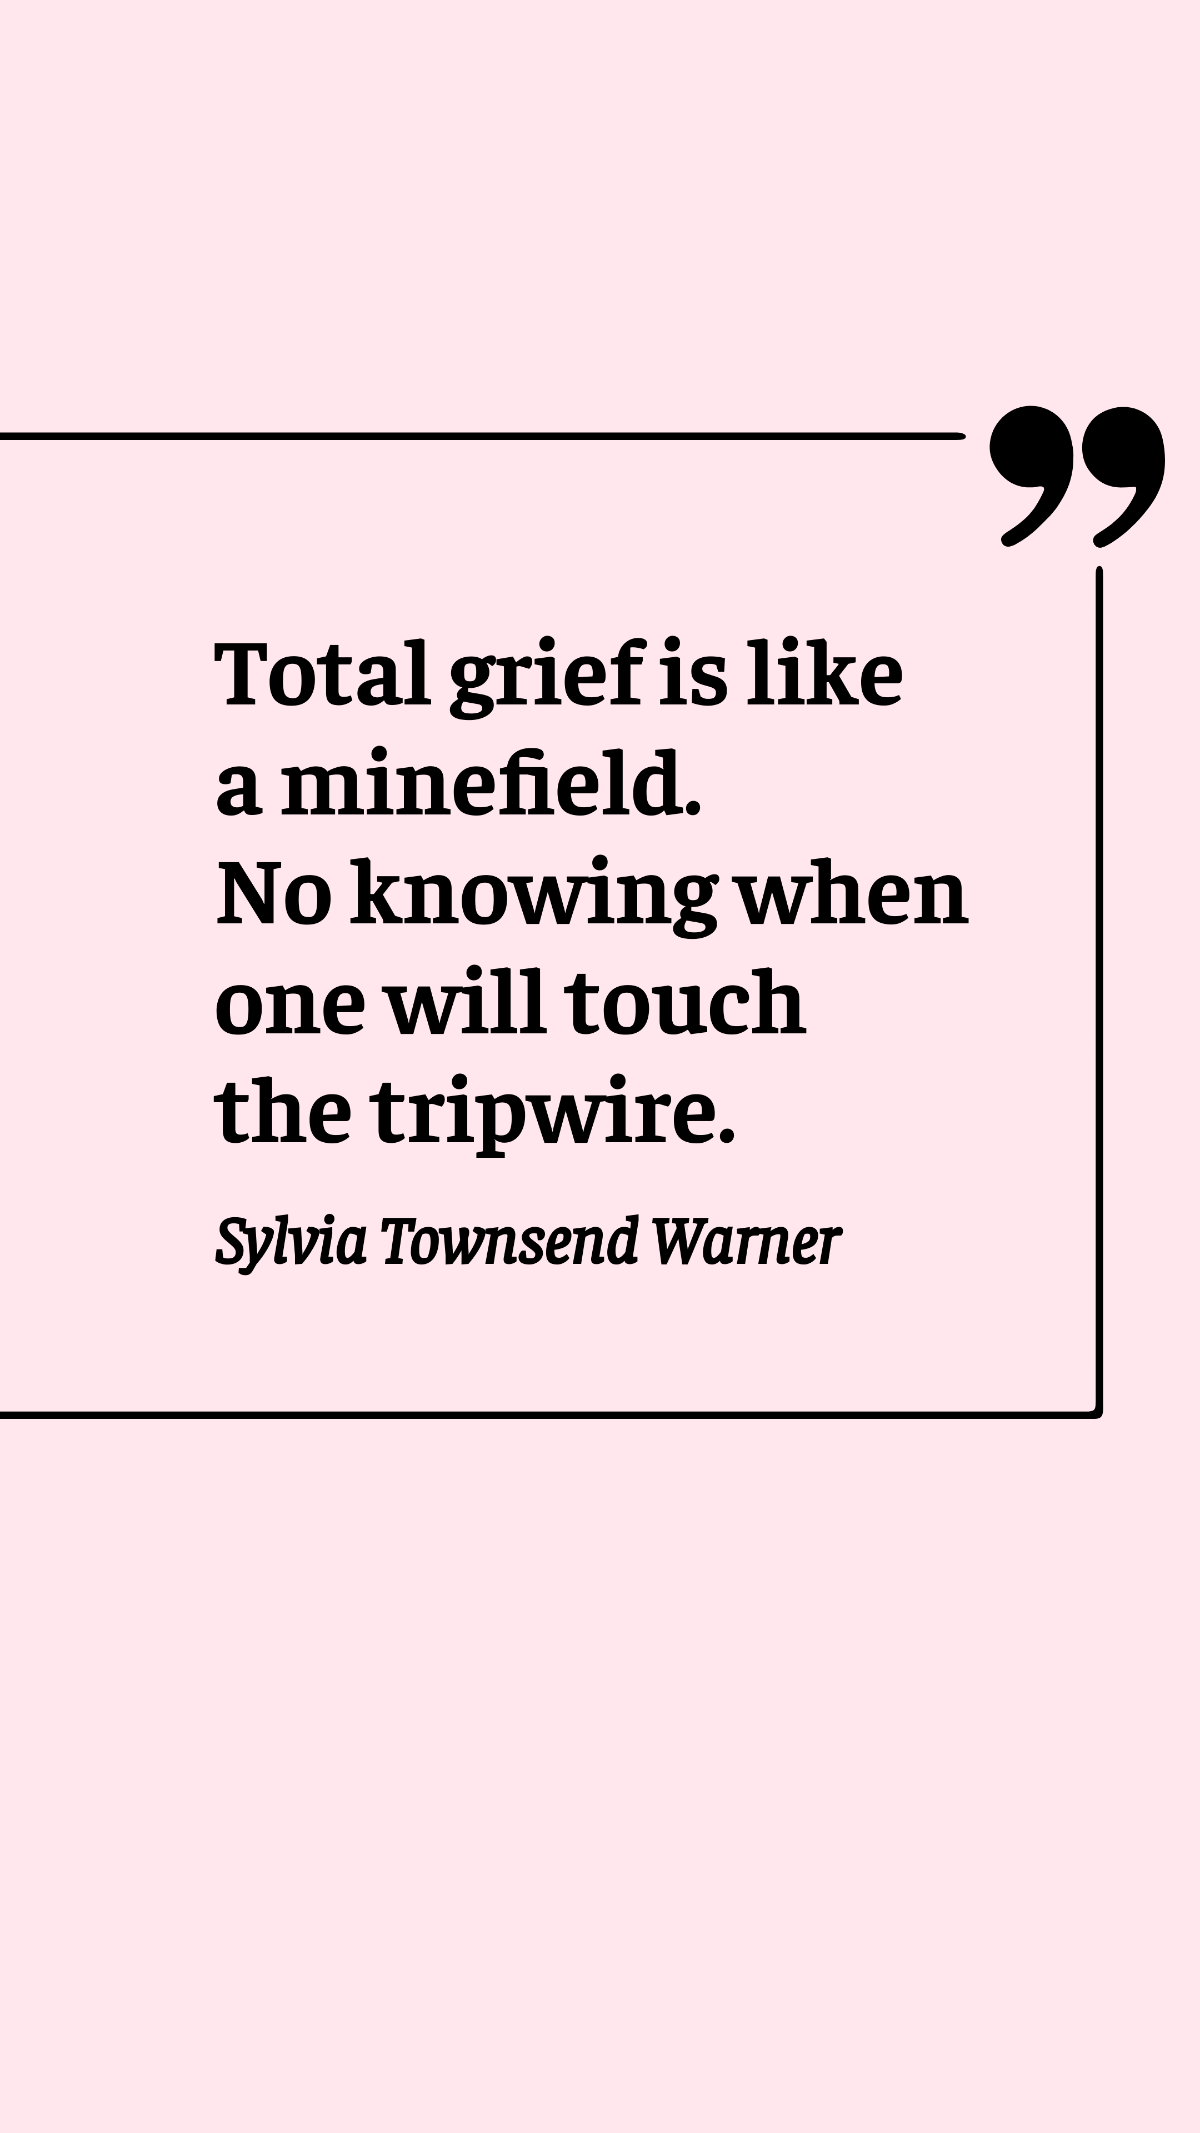 Sylvia Townsend Warner - Total grief is like a minefield. No knowing when one will touch the tripwire. Template